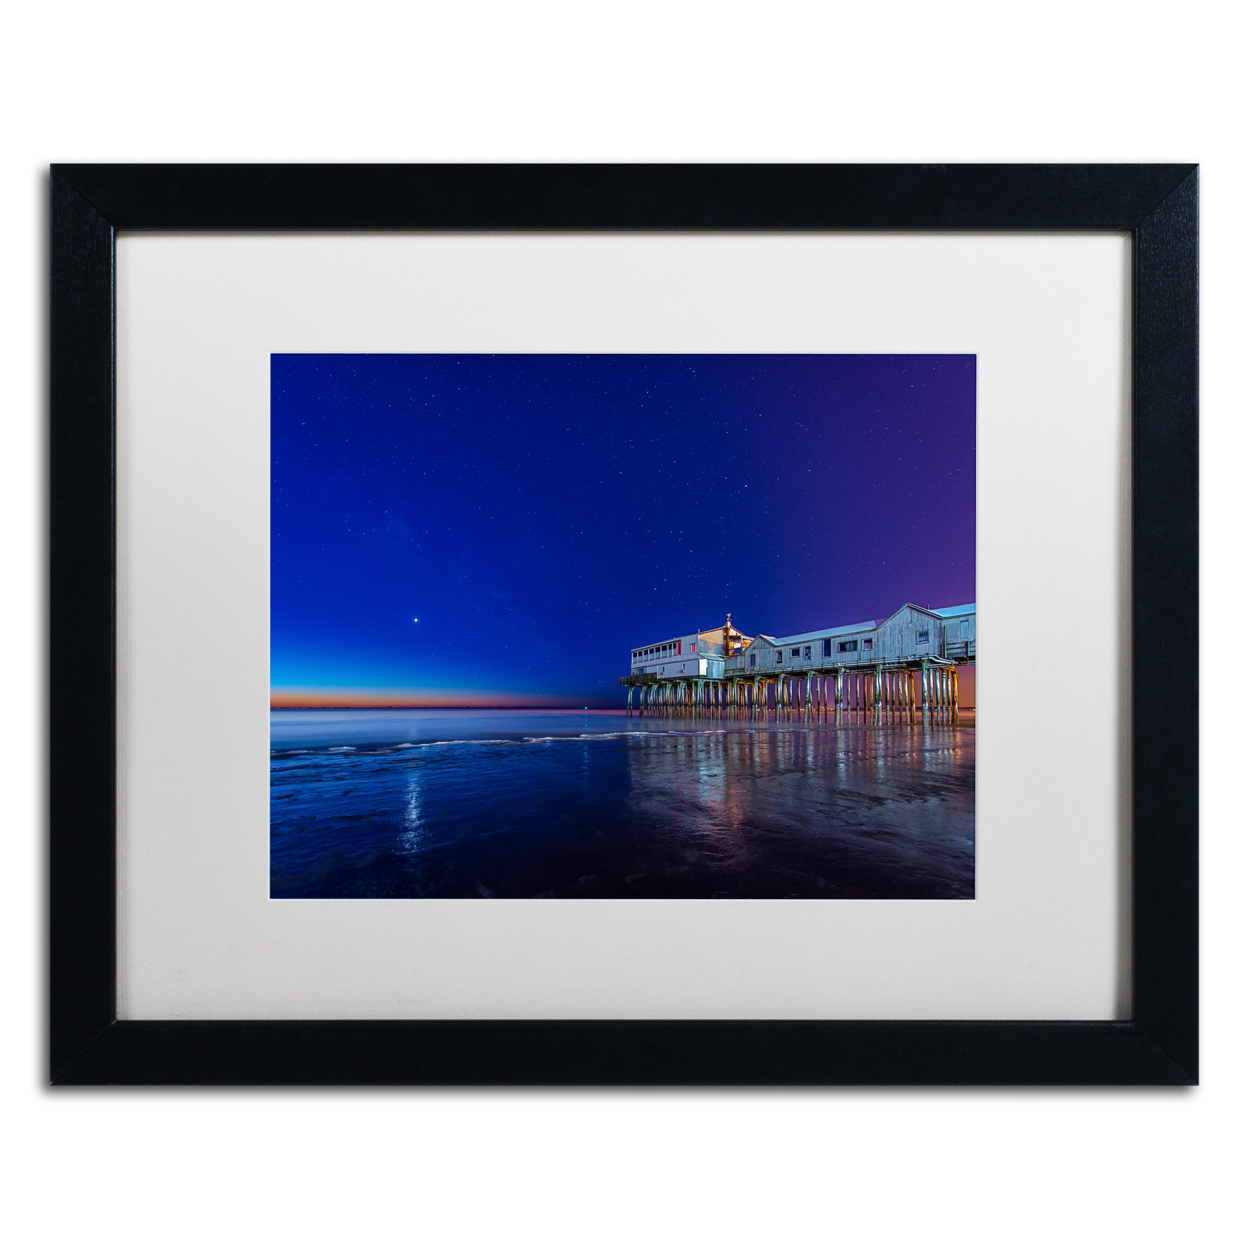 Michael Blanchette Photography 'Lights Of Dawn' Black Wooden Framed Art 18 X 22 Inches